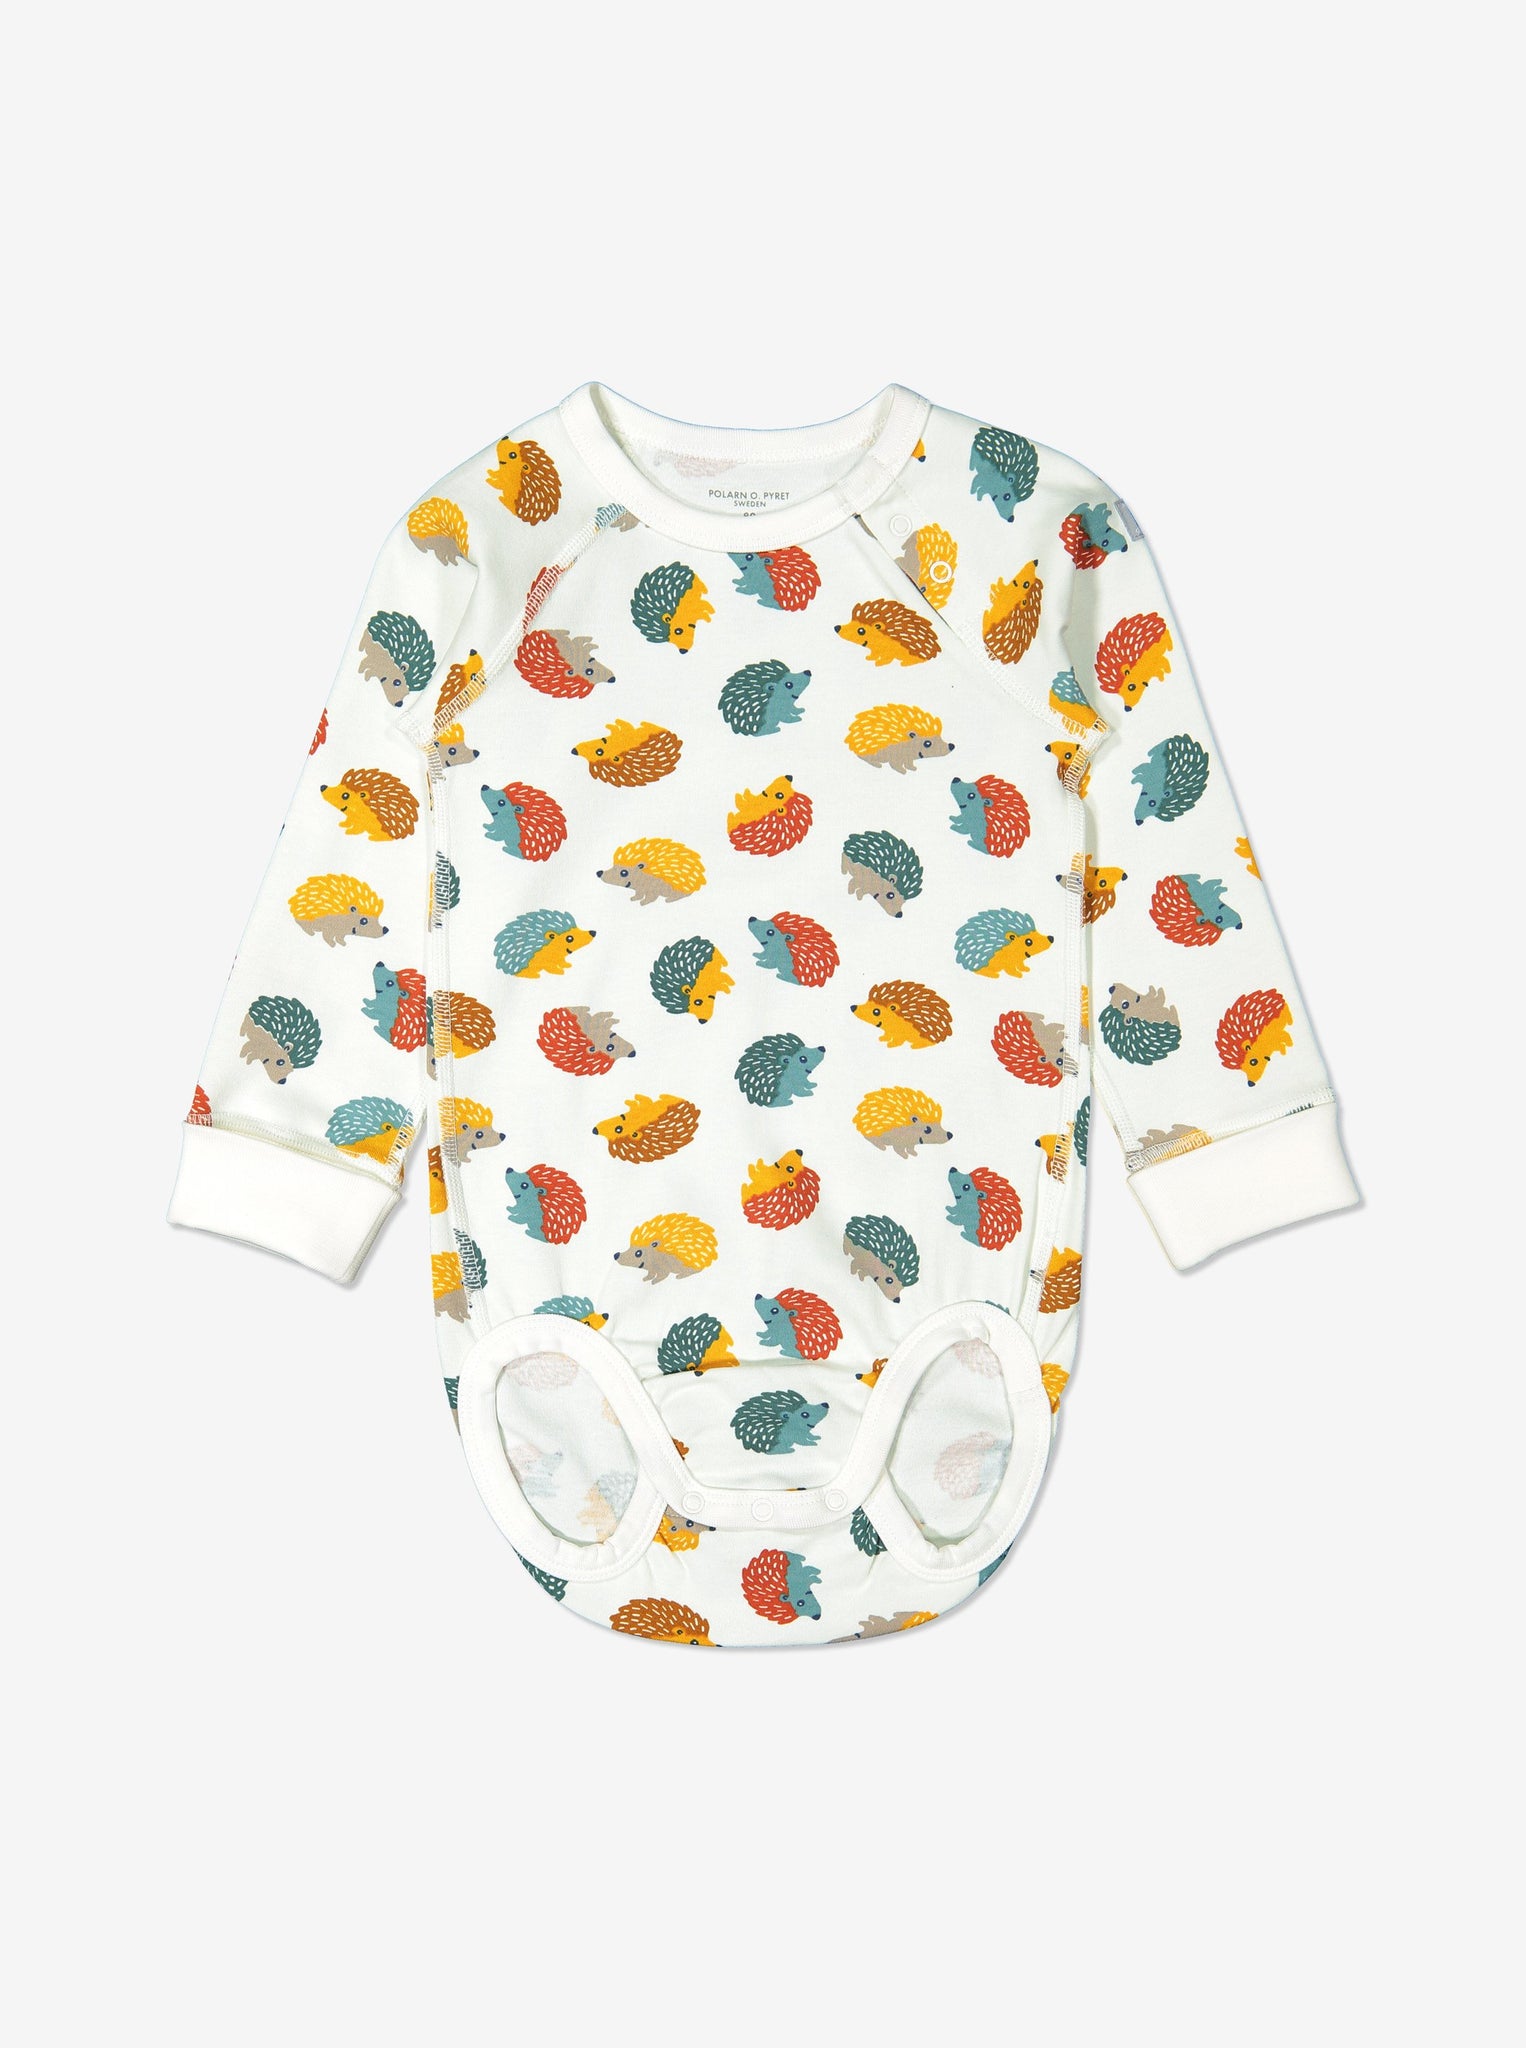 Unisex hedghog print babygrow for babies with long sleeves, made from 100% organic cotton fabric